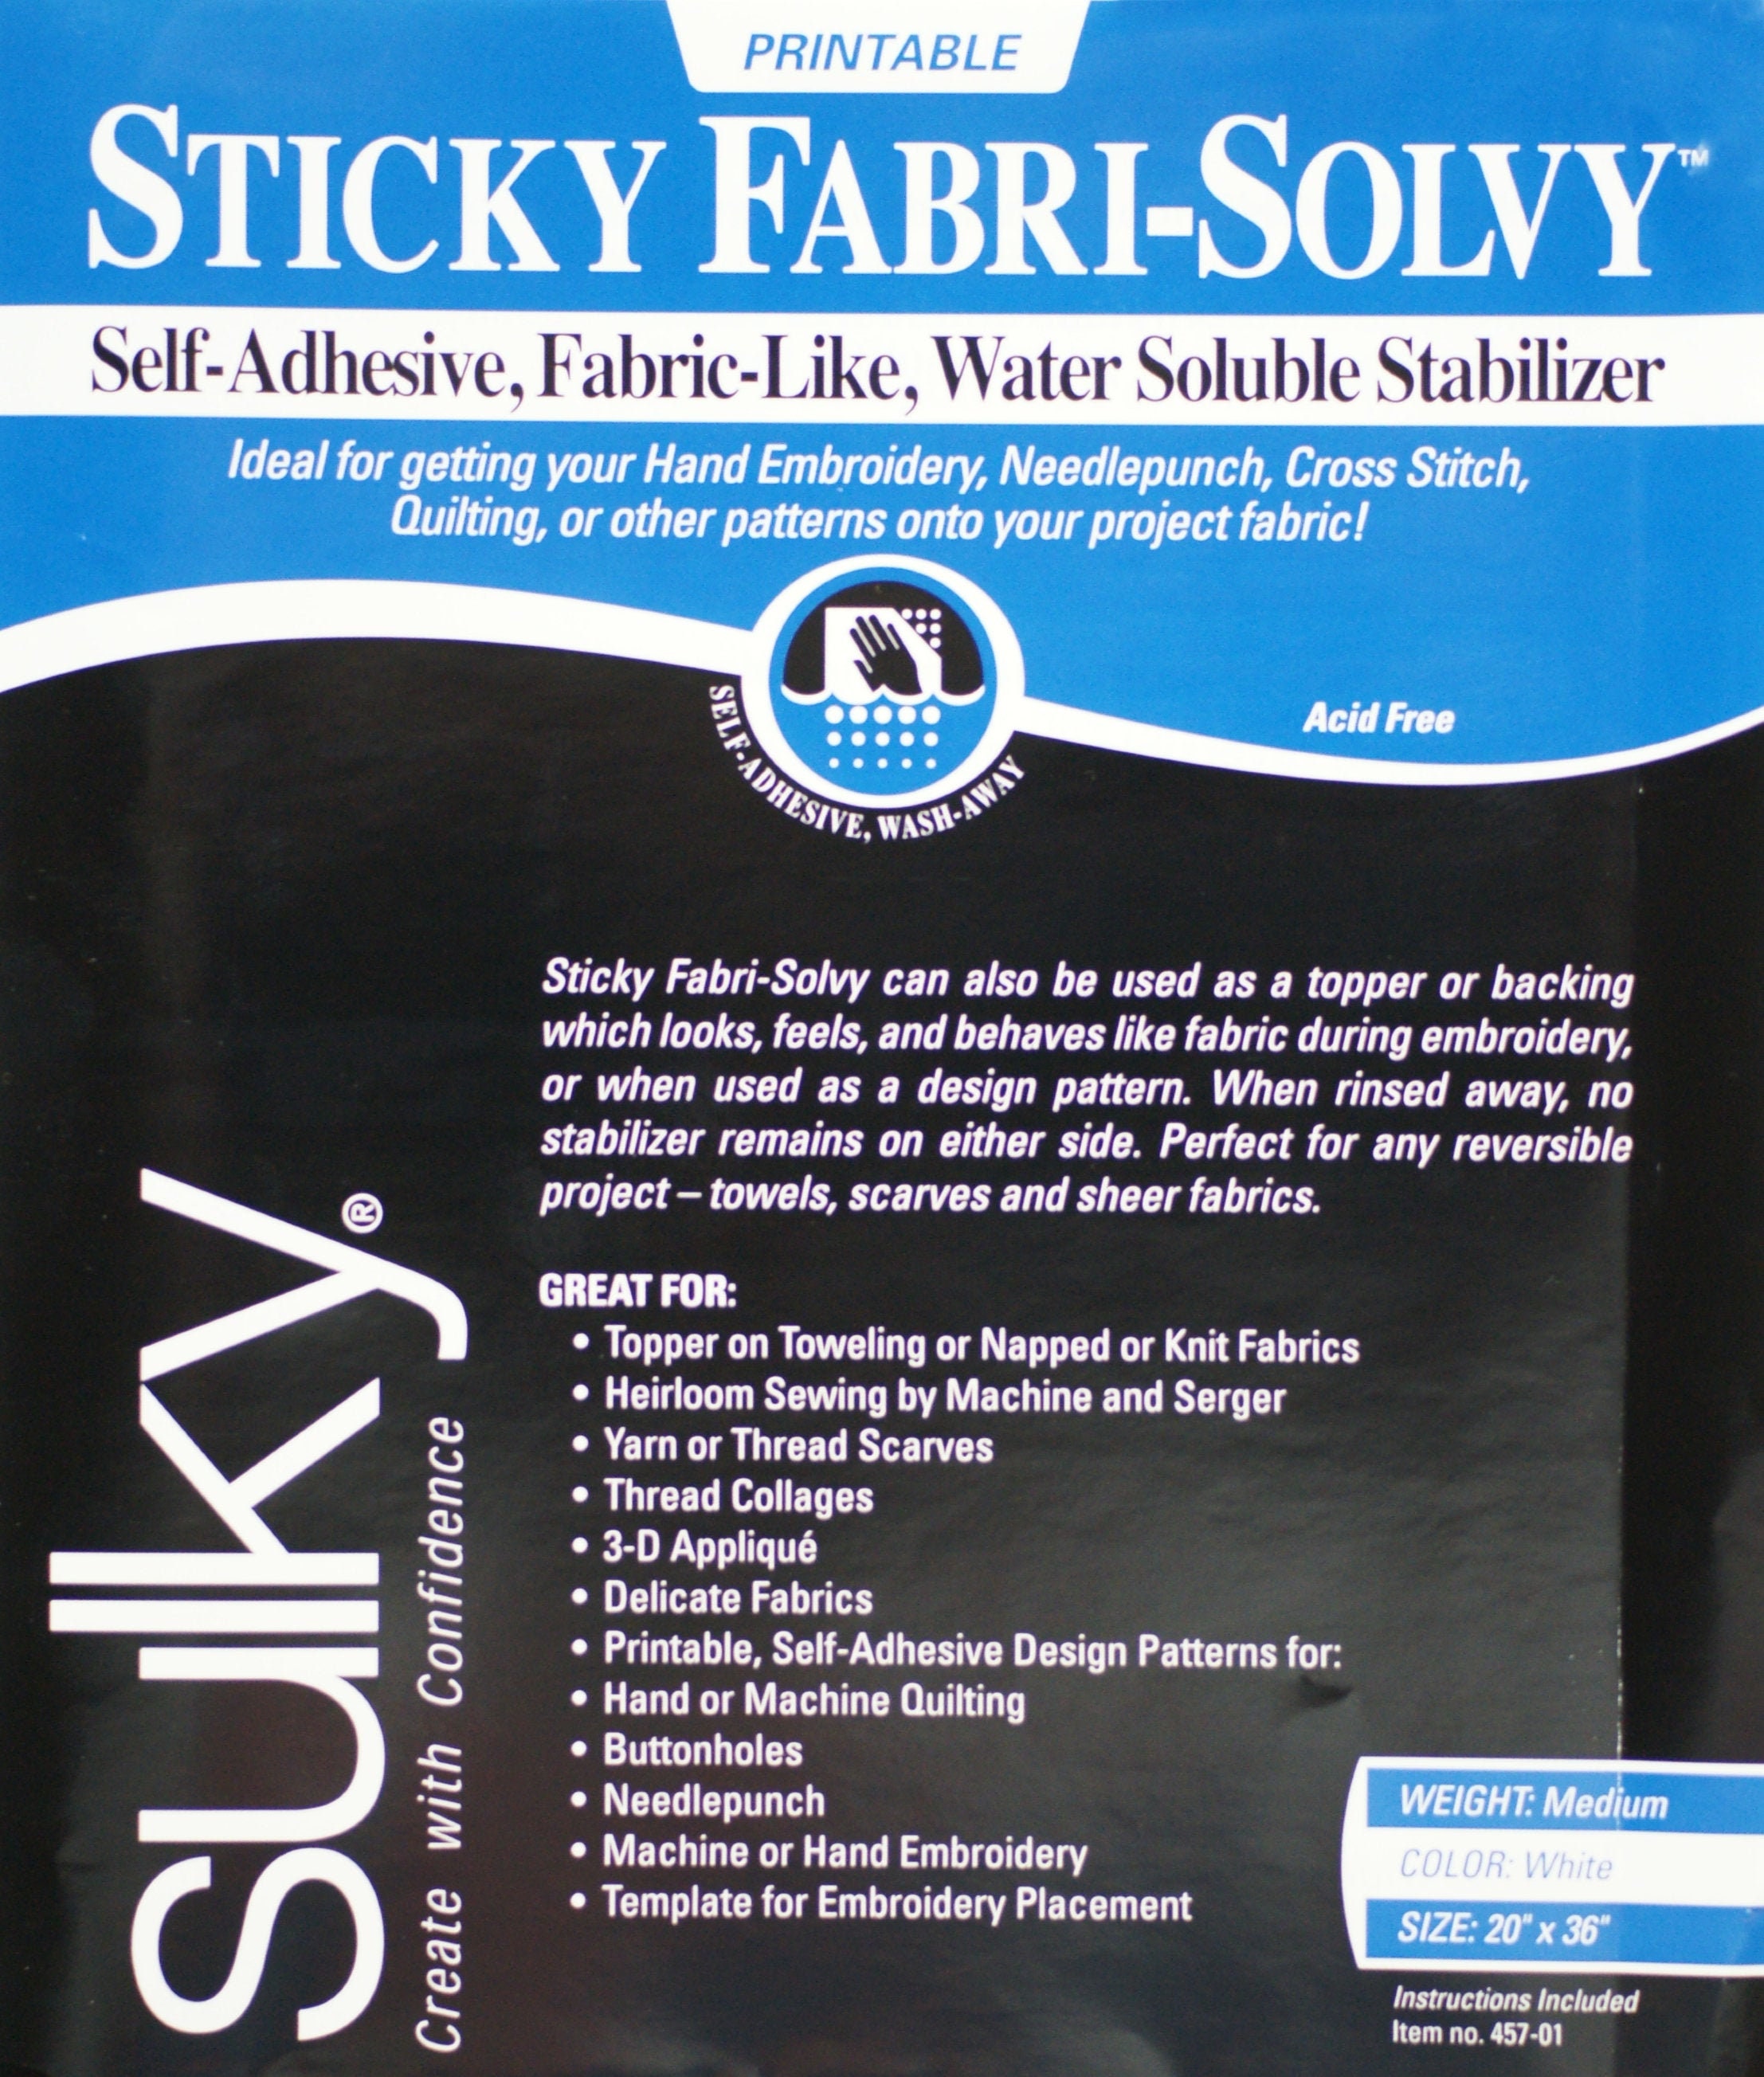 Sulky Sticky Fabri-solvy, 20x36, Printable, Water Soluble